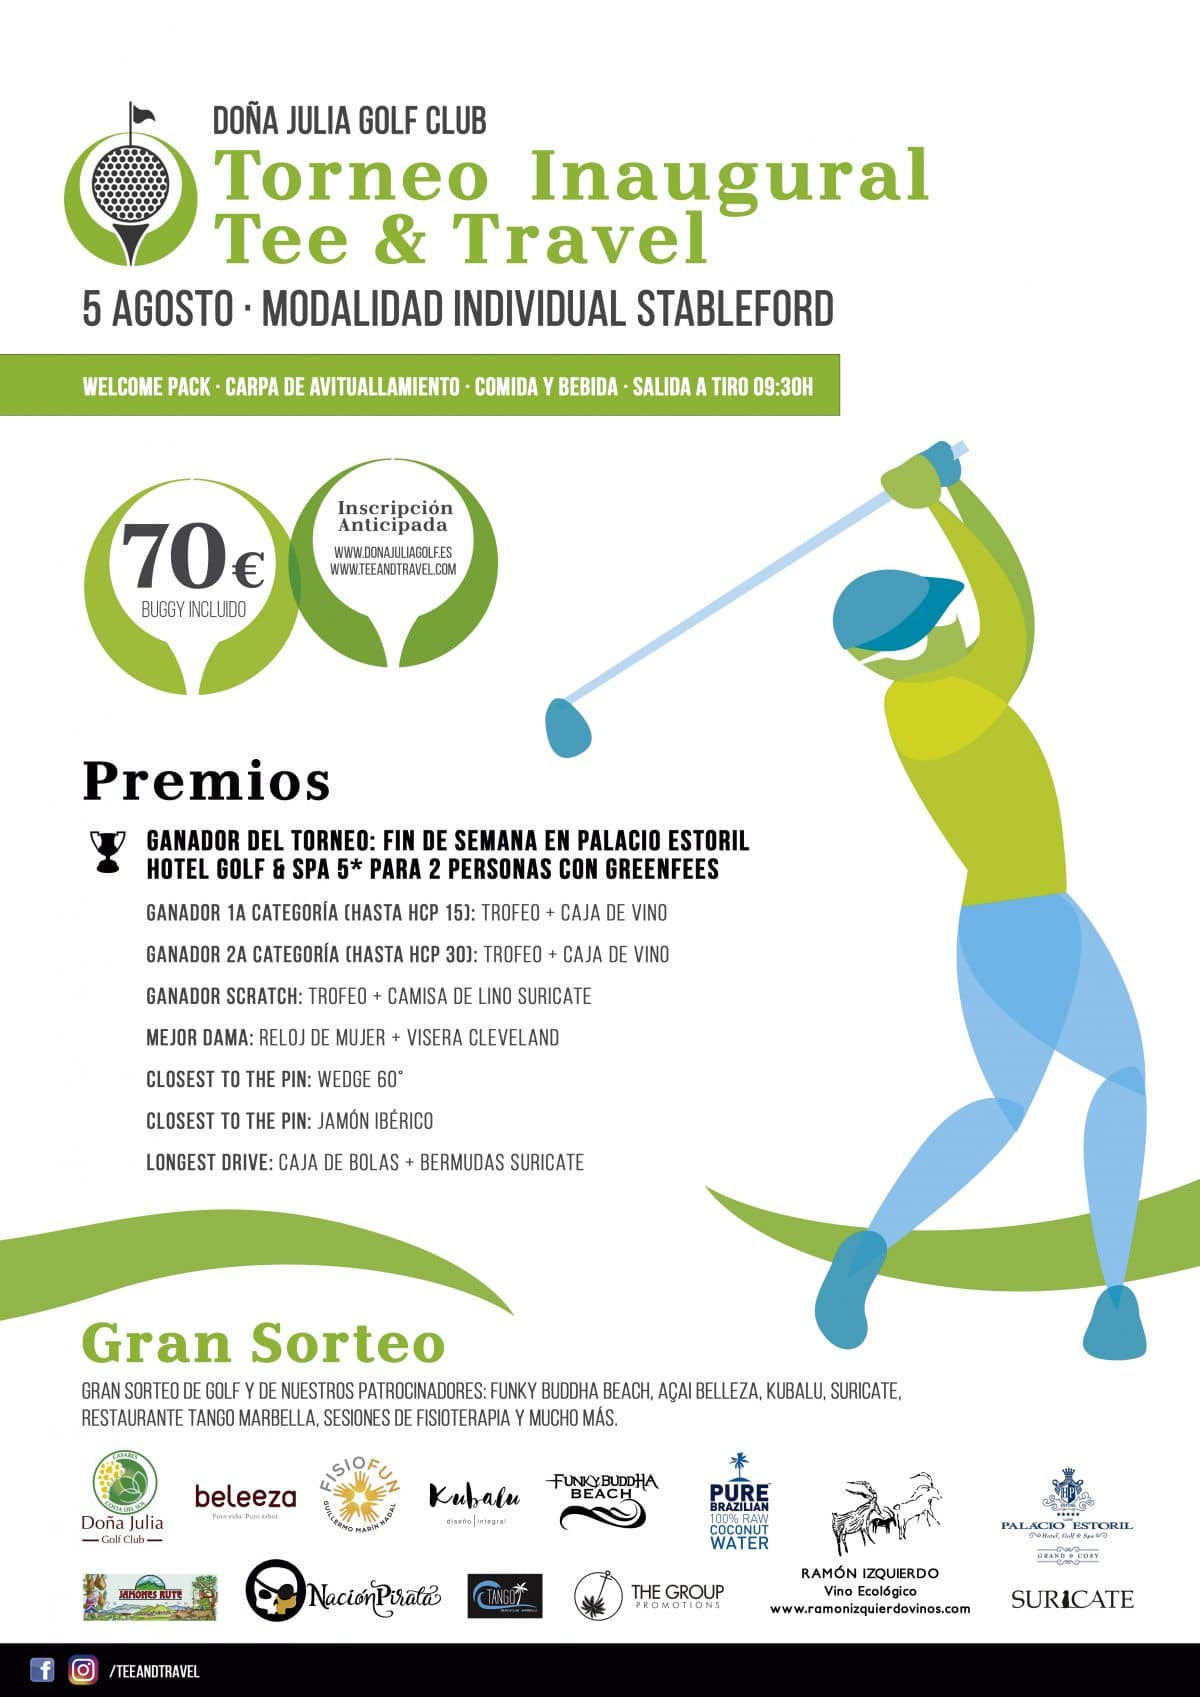 Torneo de Golf Inaugural Tee and Travel